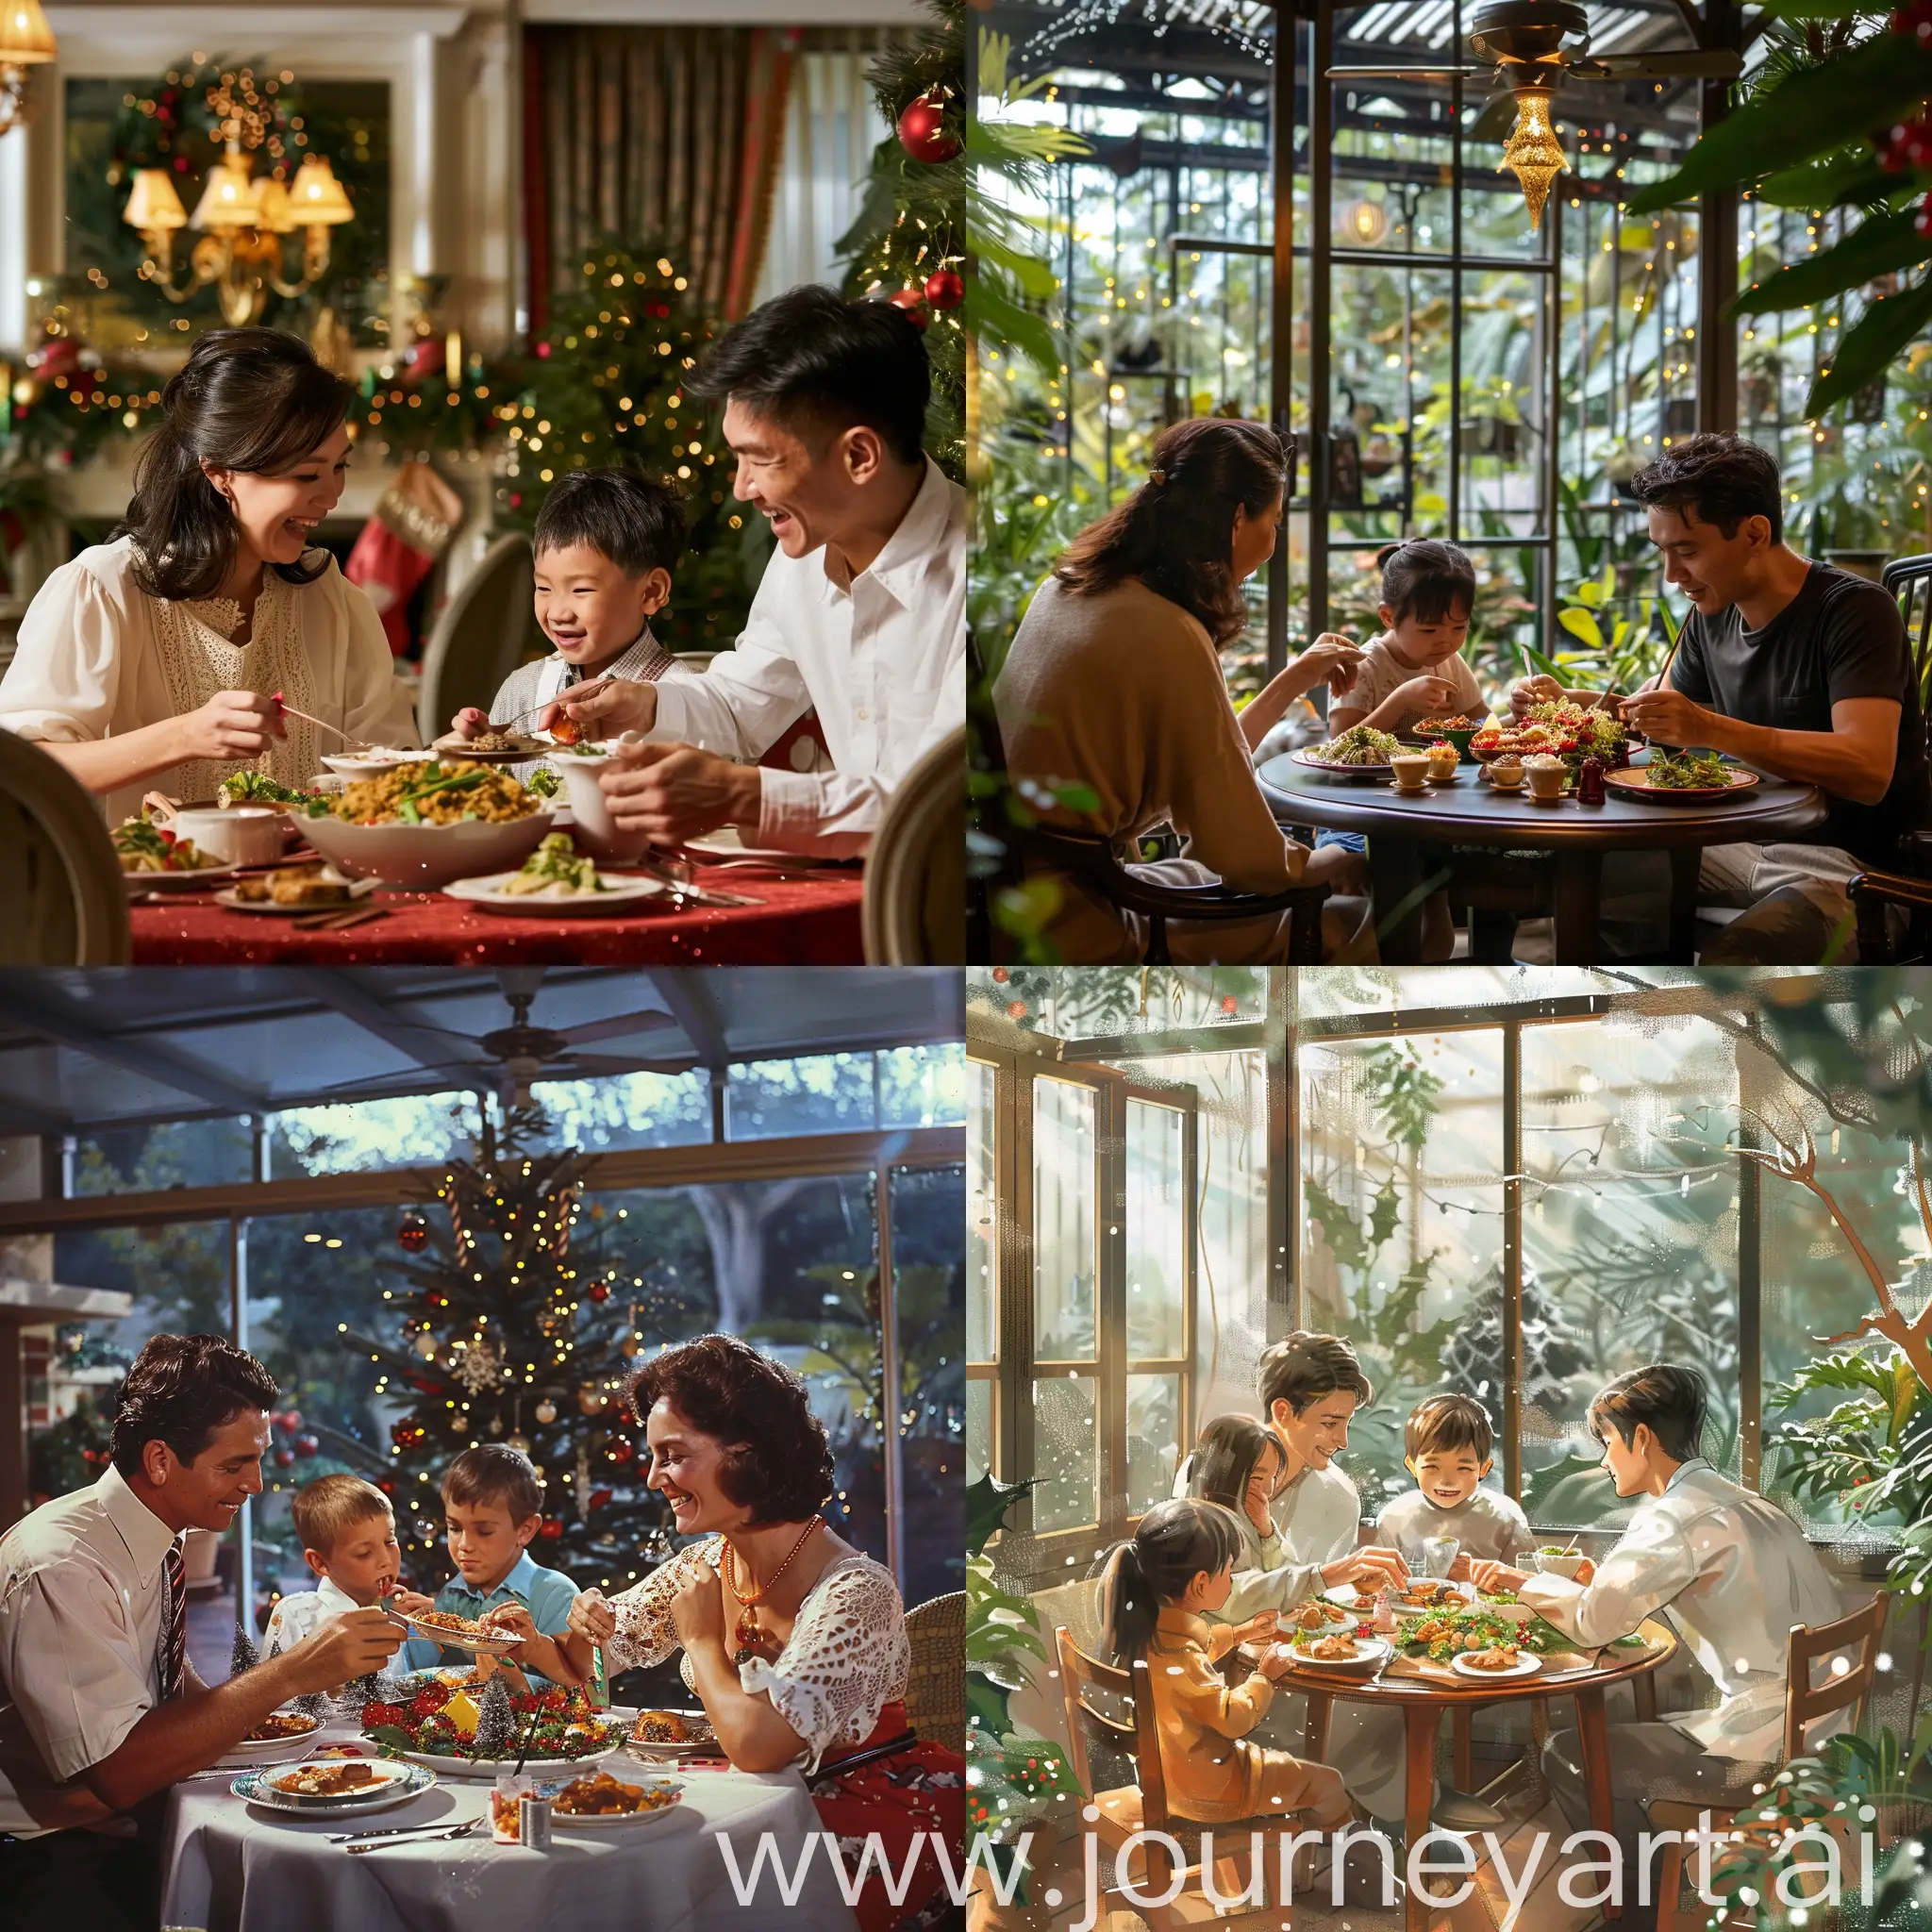 A family eating dinner at the garden home in Christmas day